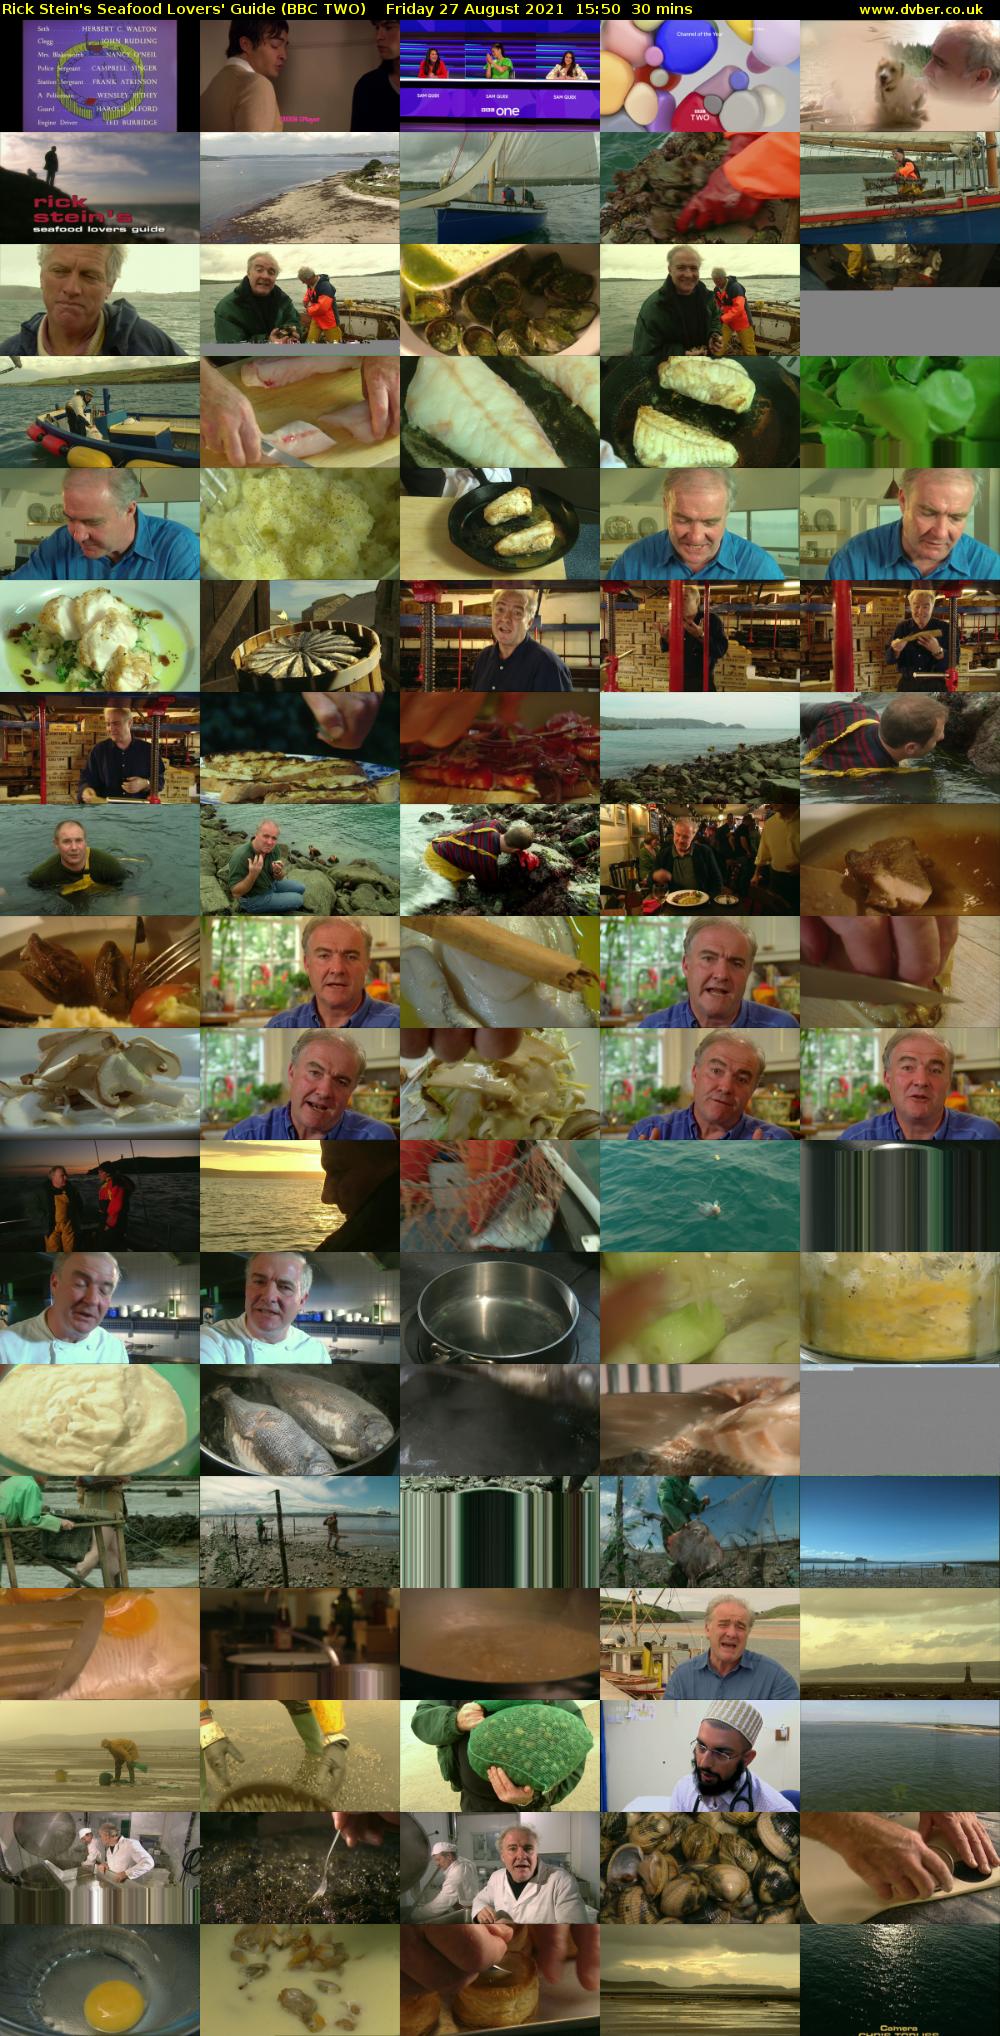 Rick Stein's Seafood Lovers' Guide (BBC TWO) Friday 27 August 2021 15:50 - 16:20